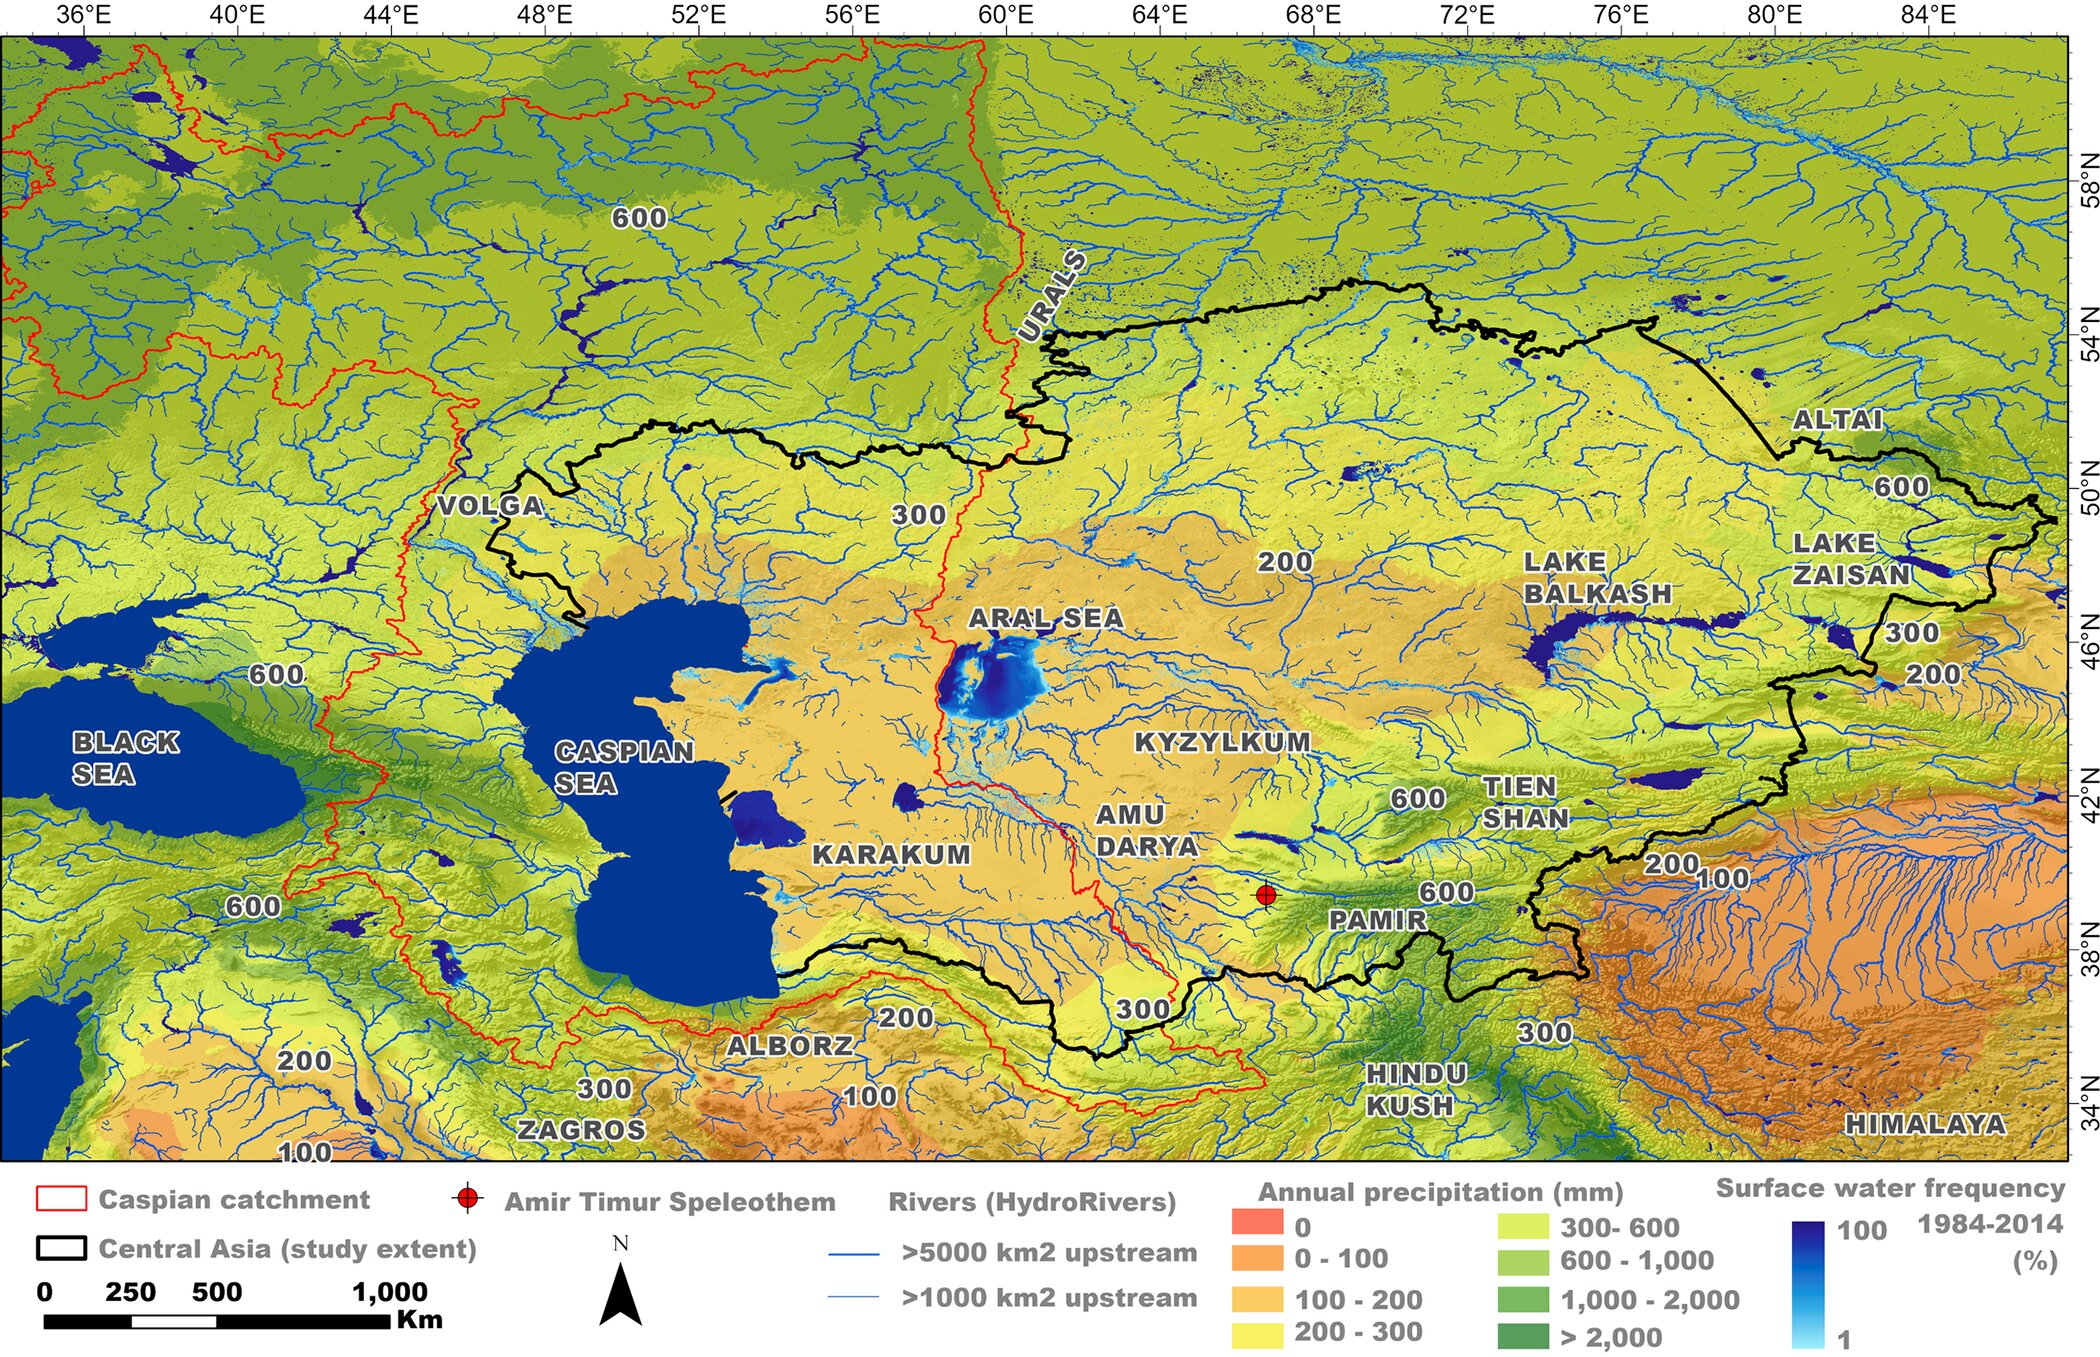 #Central Asia identified as a key region for human ancestors